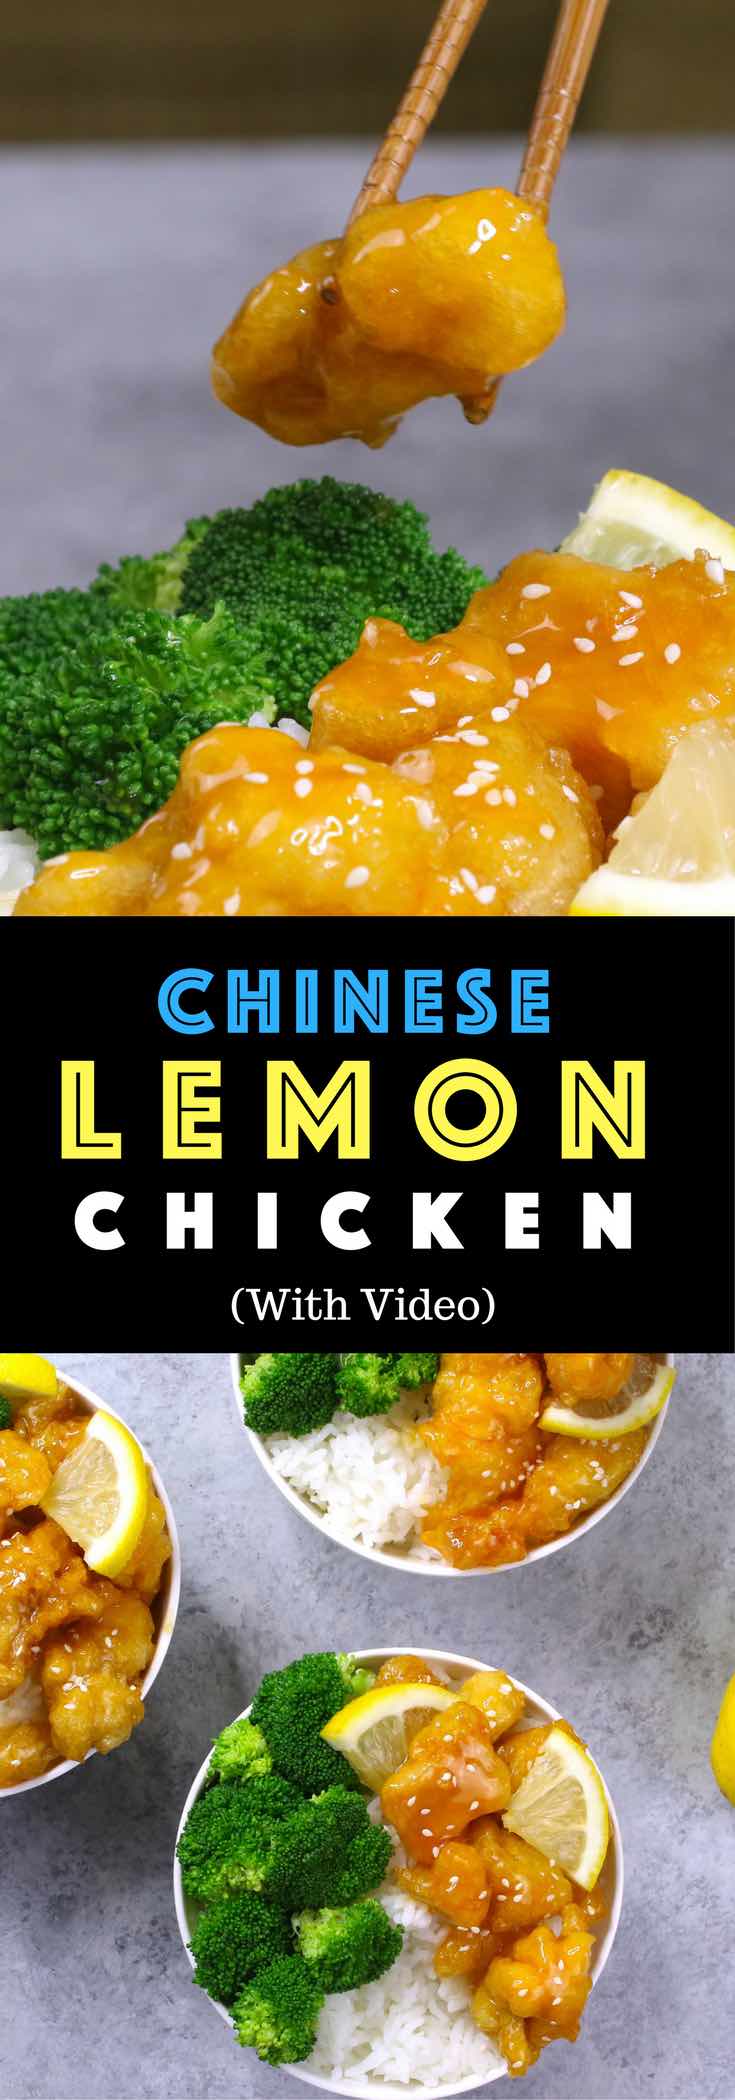 Easy, crispy and most unbelievably delicious Lemon Chicken with Rice Bowls. So much better than take outs! All you need is only a few ingredients: chicken breast, lemon, salt & pepper, egg, oil, sugar, and cornstarch. One of the best Asian dinner ideas! Served with rice and broccoli. Quick and easy dinner recipe. Video recipe. | Tipbuzz.com 